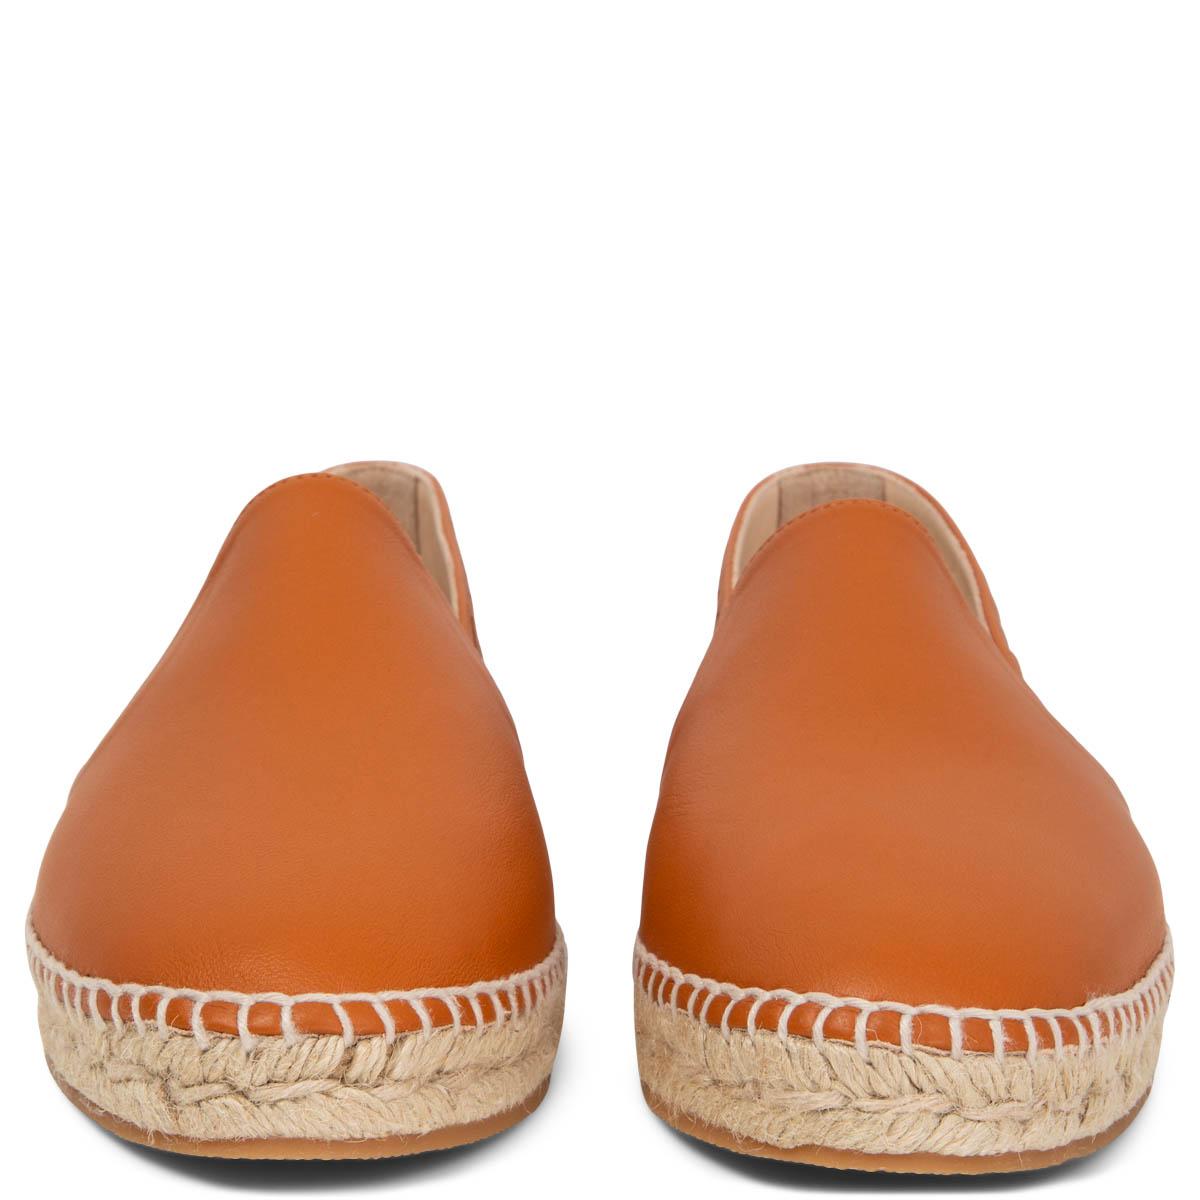 100% authentic Bottega Veneta Gala Espadrilles in pumpkin leather featuring Intrecciato detail around the heel and a beige raffia sole. Brand new. Come with dust bag. 

Measurements
Imprinted Size	38
Shoe Size	38
Inside Sole	25cm (9.8in)
Width	7.5cm